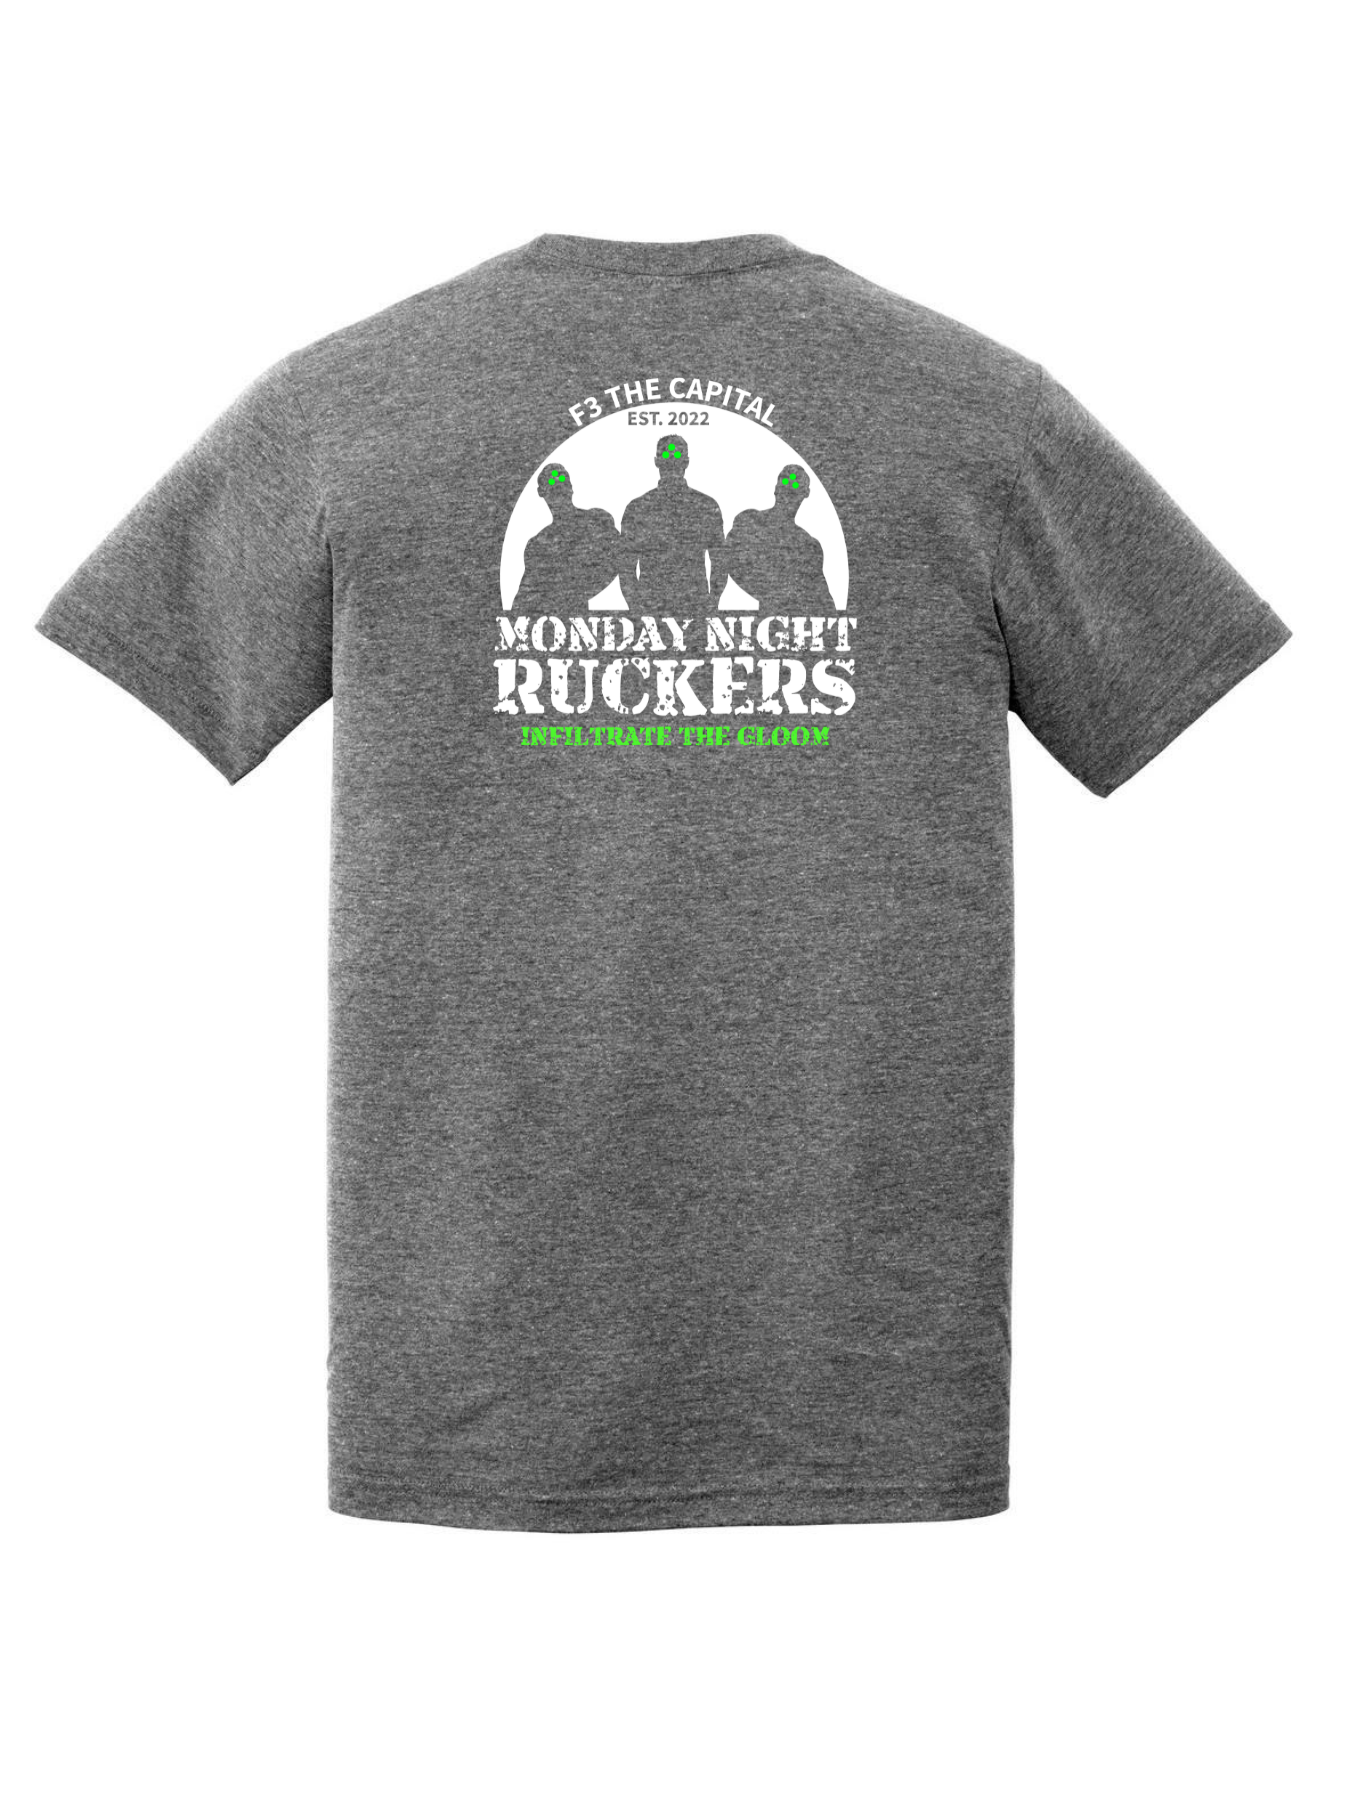 F3 Capital Monday Night Ruckers Pre-Order February 2023